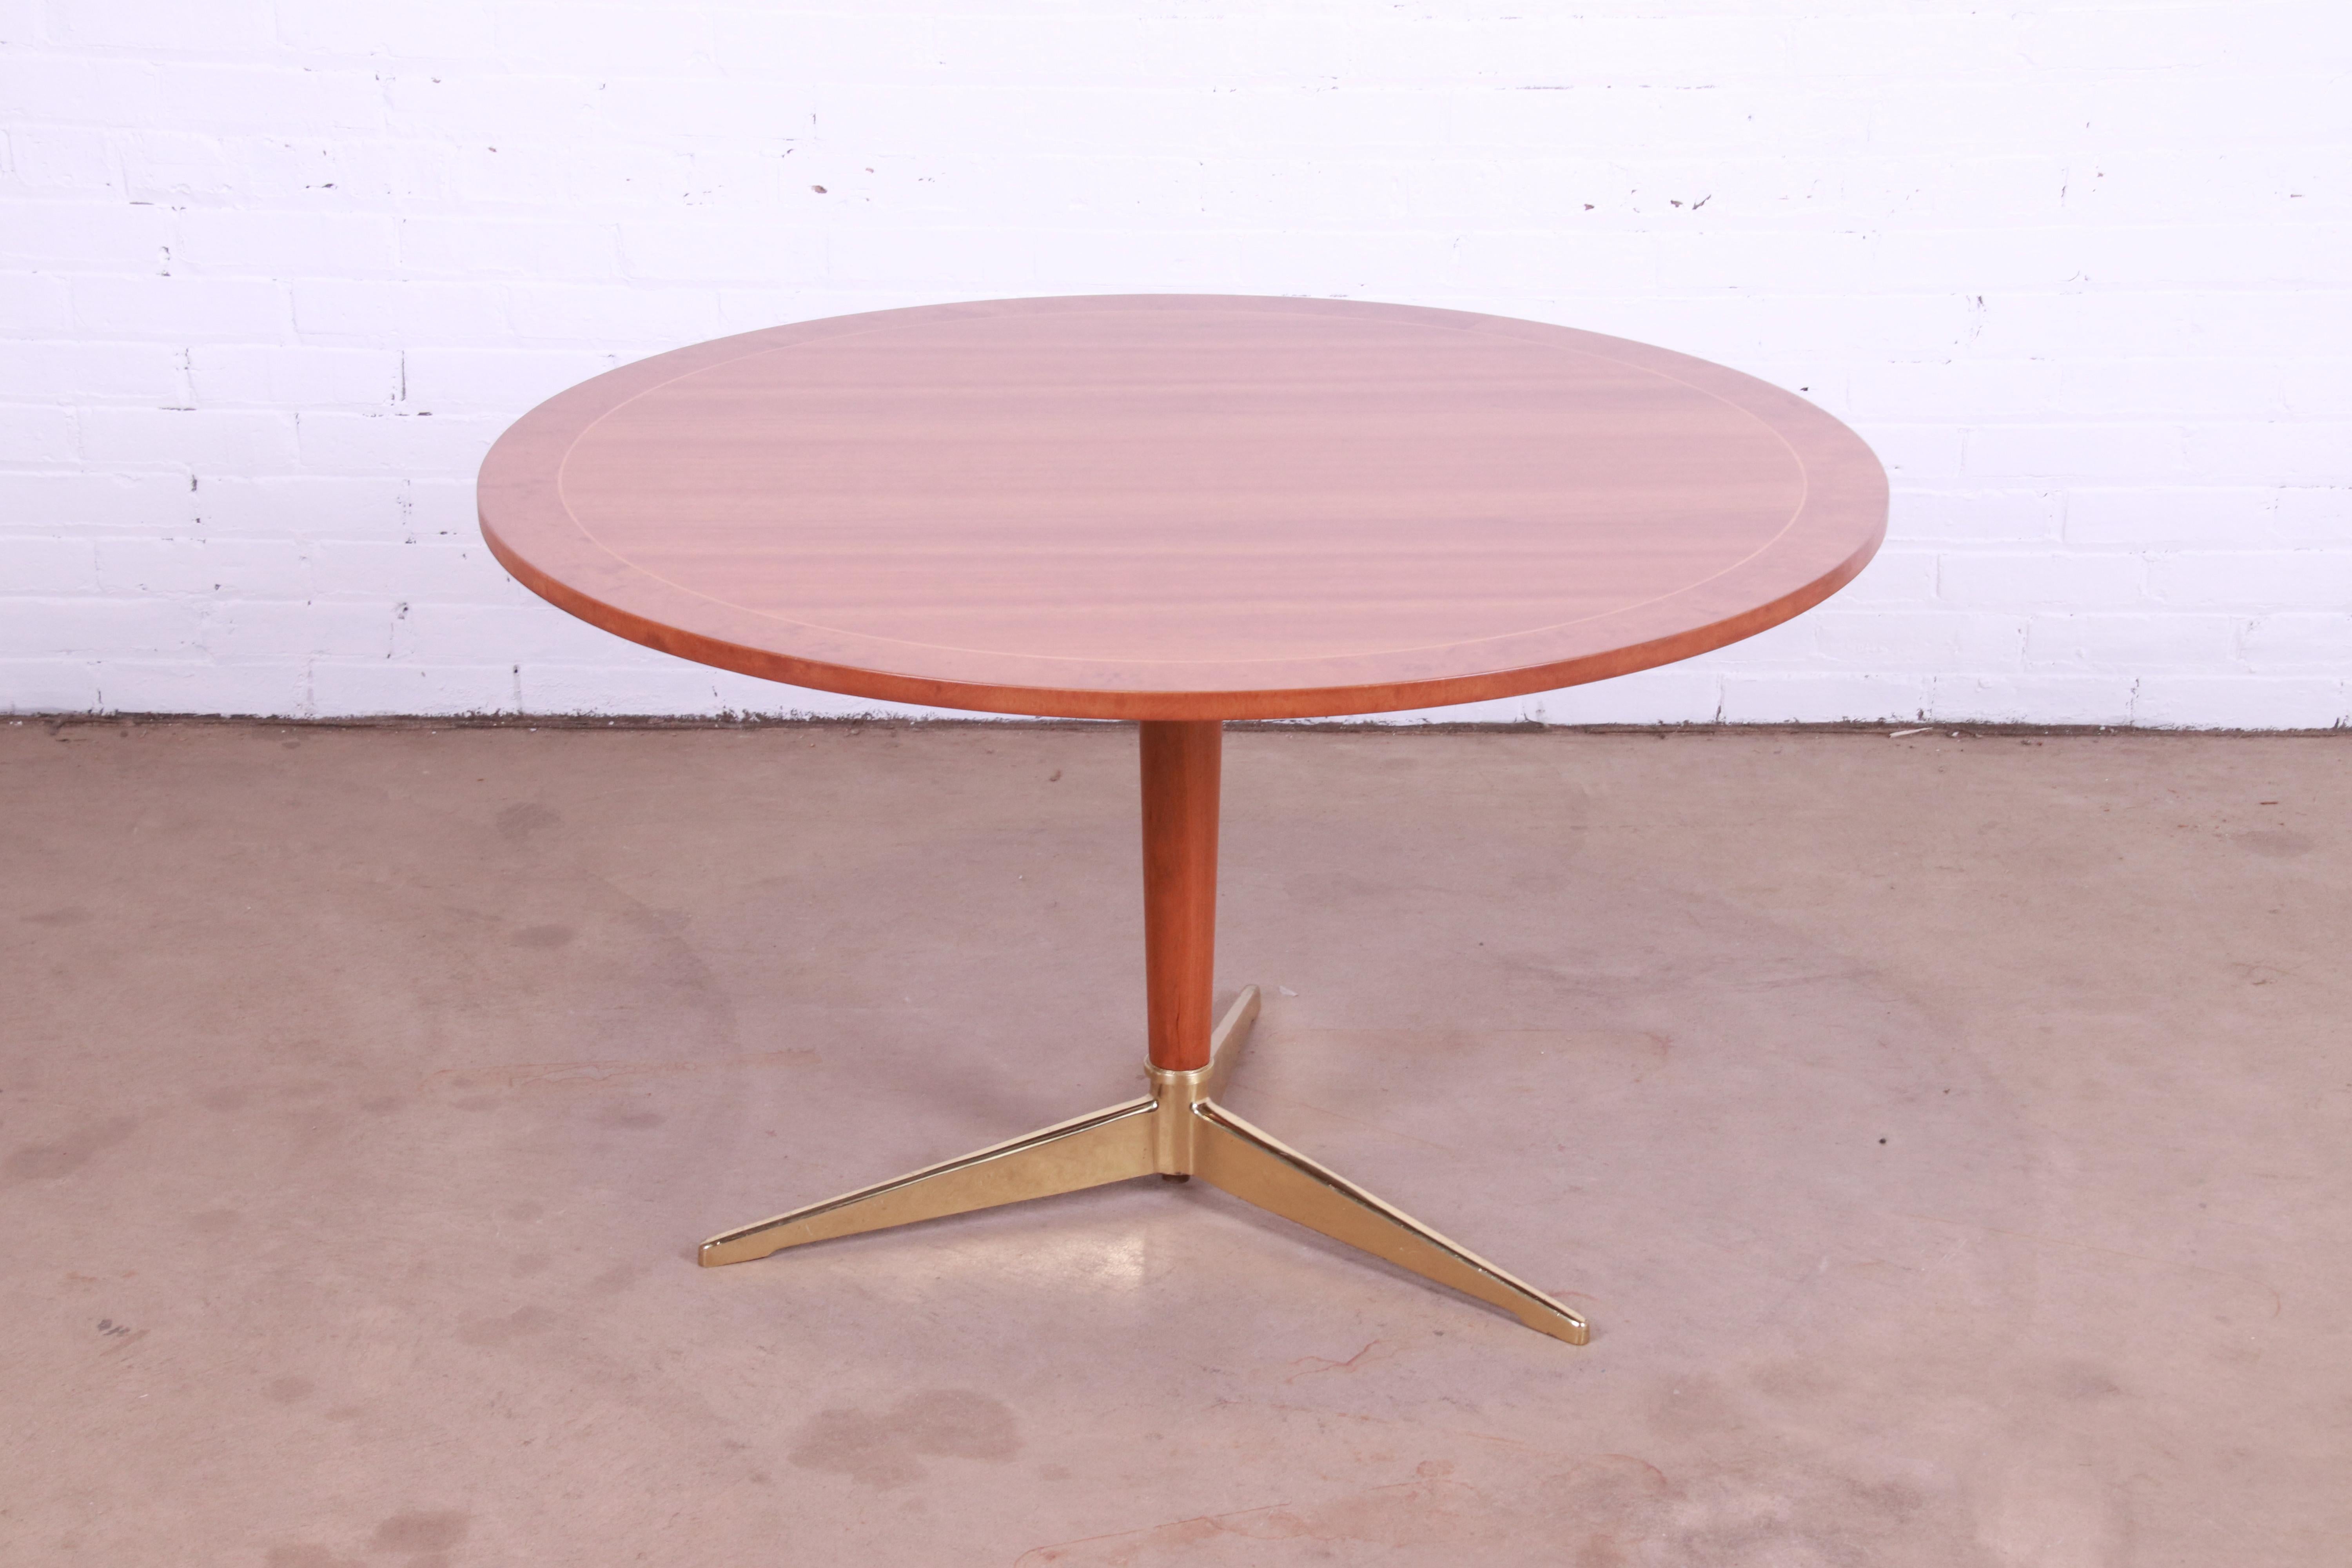 A gorgeous Mid-Century Modern pedestal game table, center table, or café table

By Baker Furniture

USA, mid-20th century

Cherry wood, with satinwood string inlay, burl wood banding, solid cherry pedestal, and brass tripod base. Featuring a